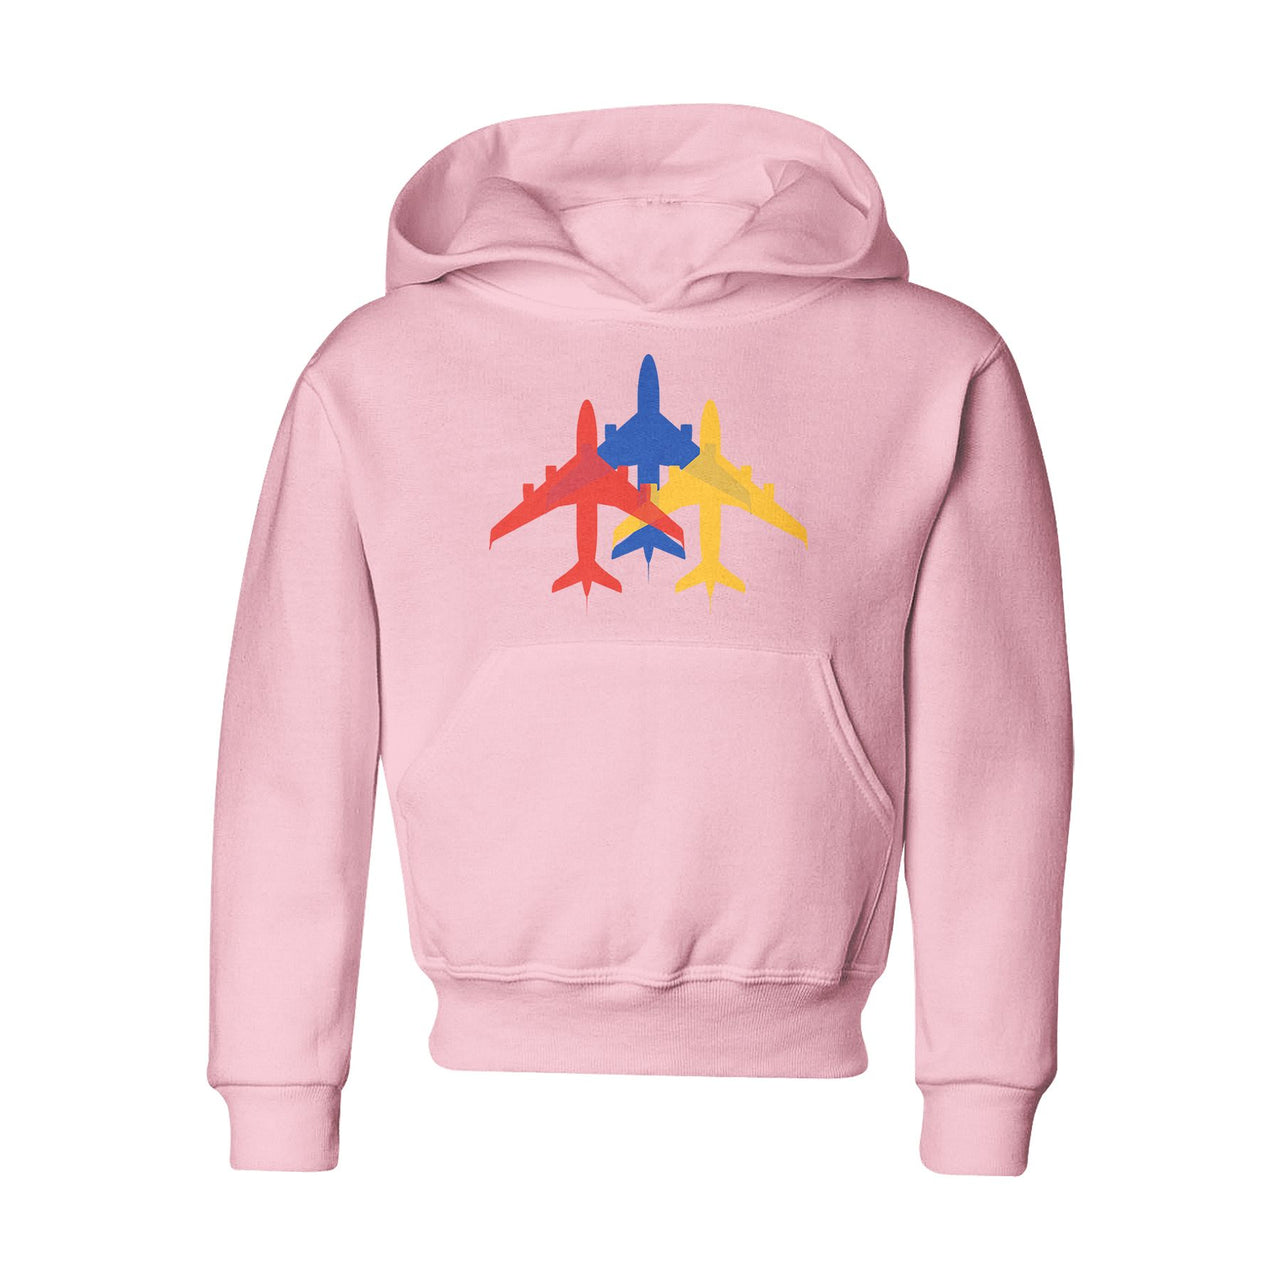 Colourful 3 Airplanes Designed "CHILDREN" Hoodies